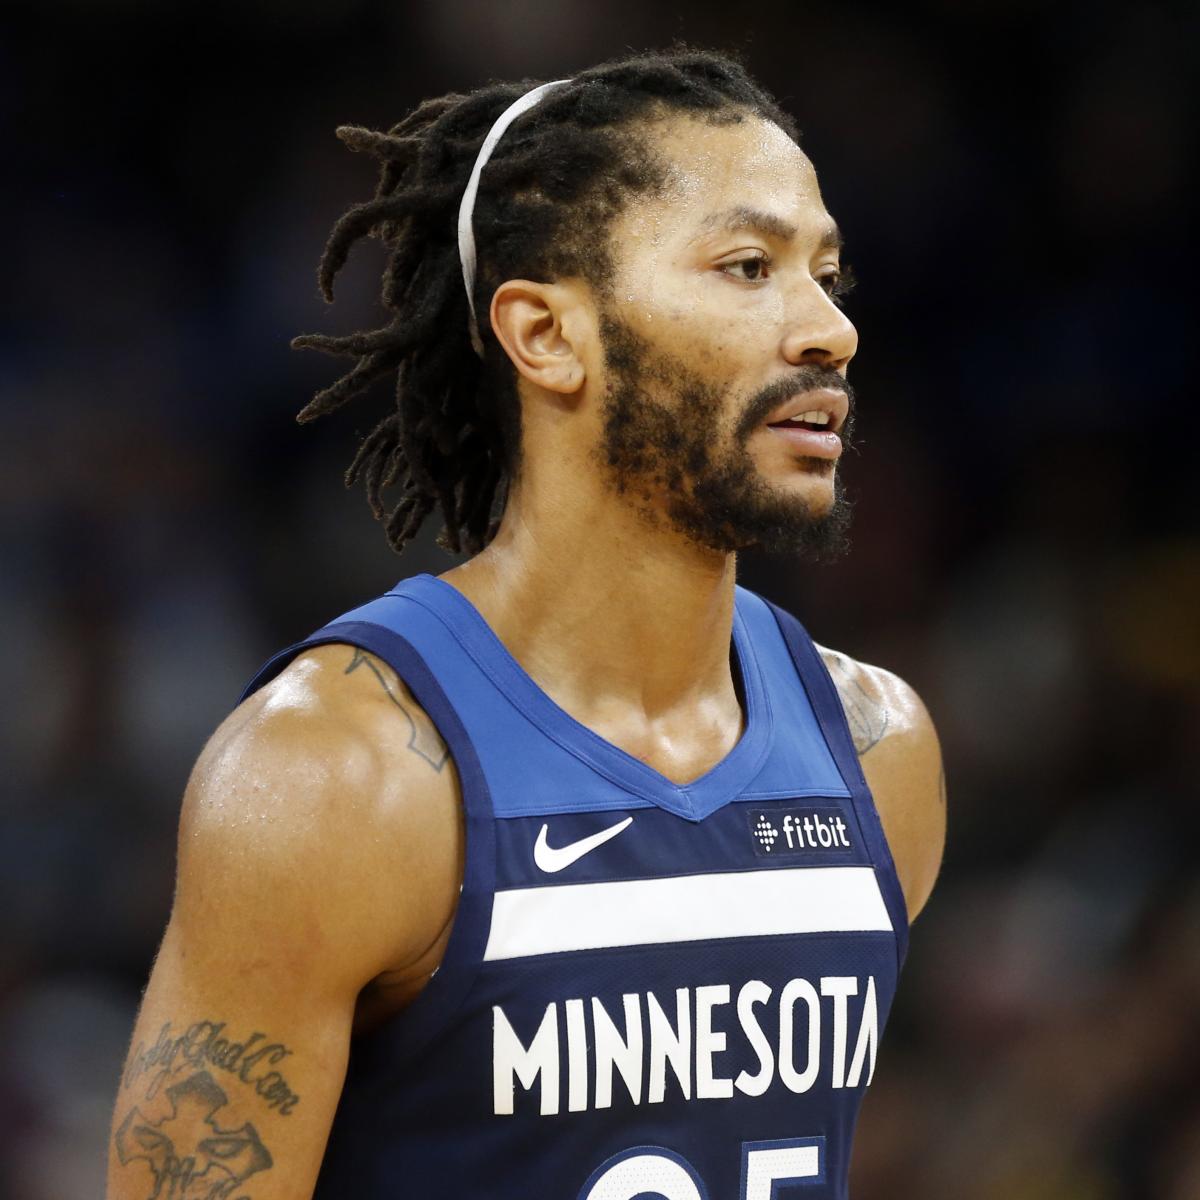 NBA - 🚨🚨🚨 Derrick Rose drops a CAREER-HIGH 50 POINTS to lead